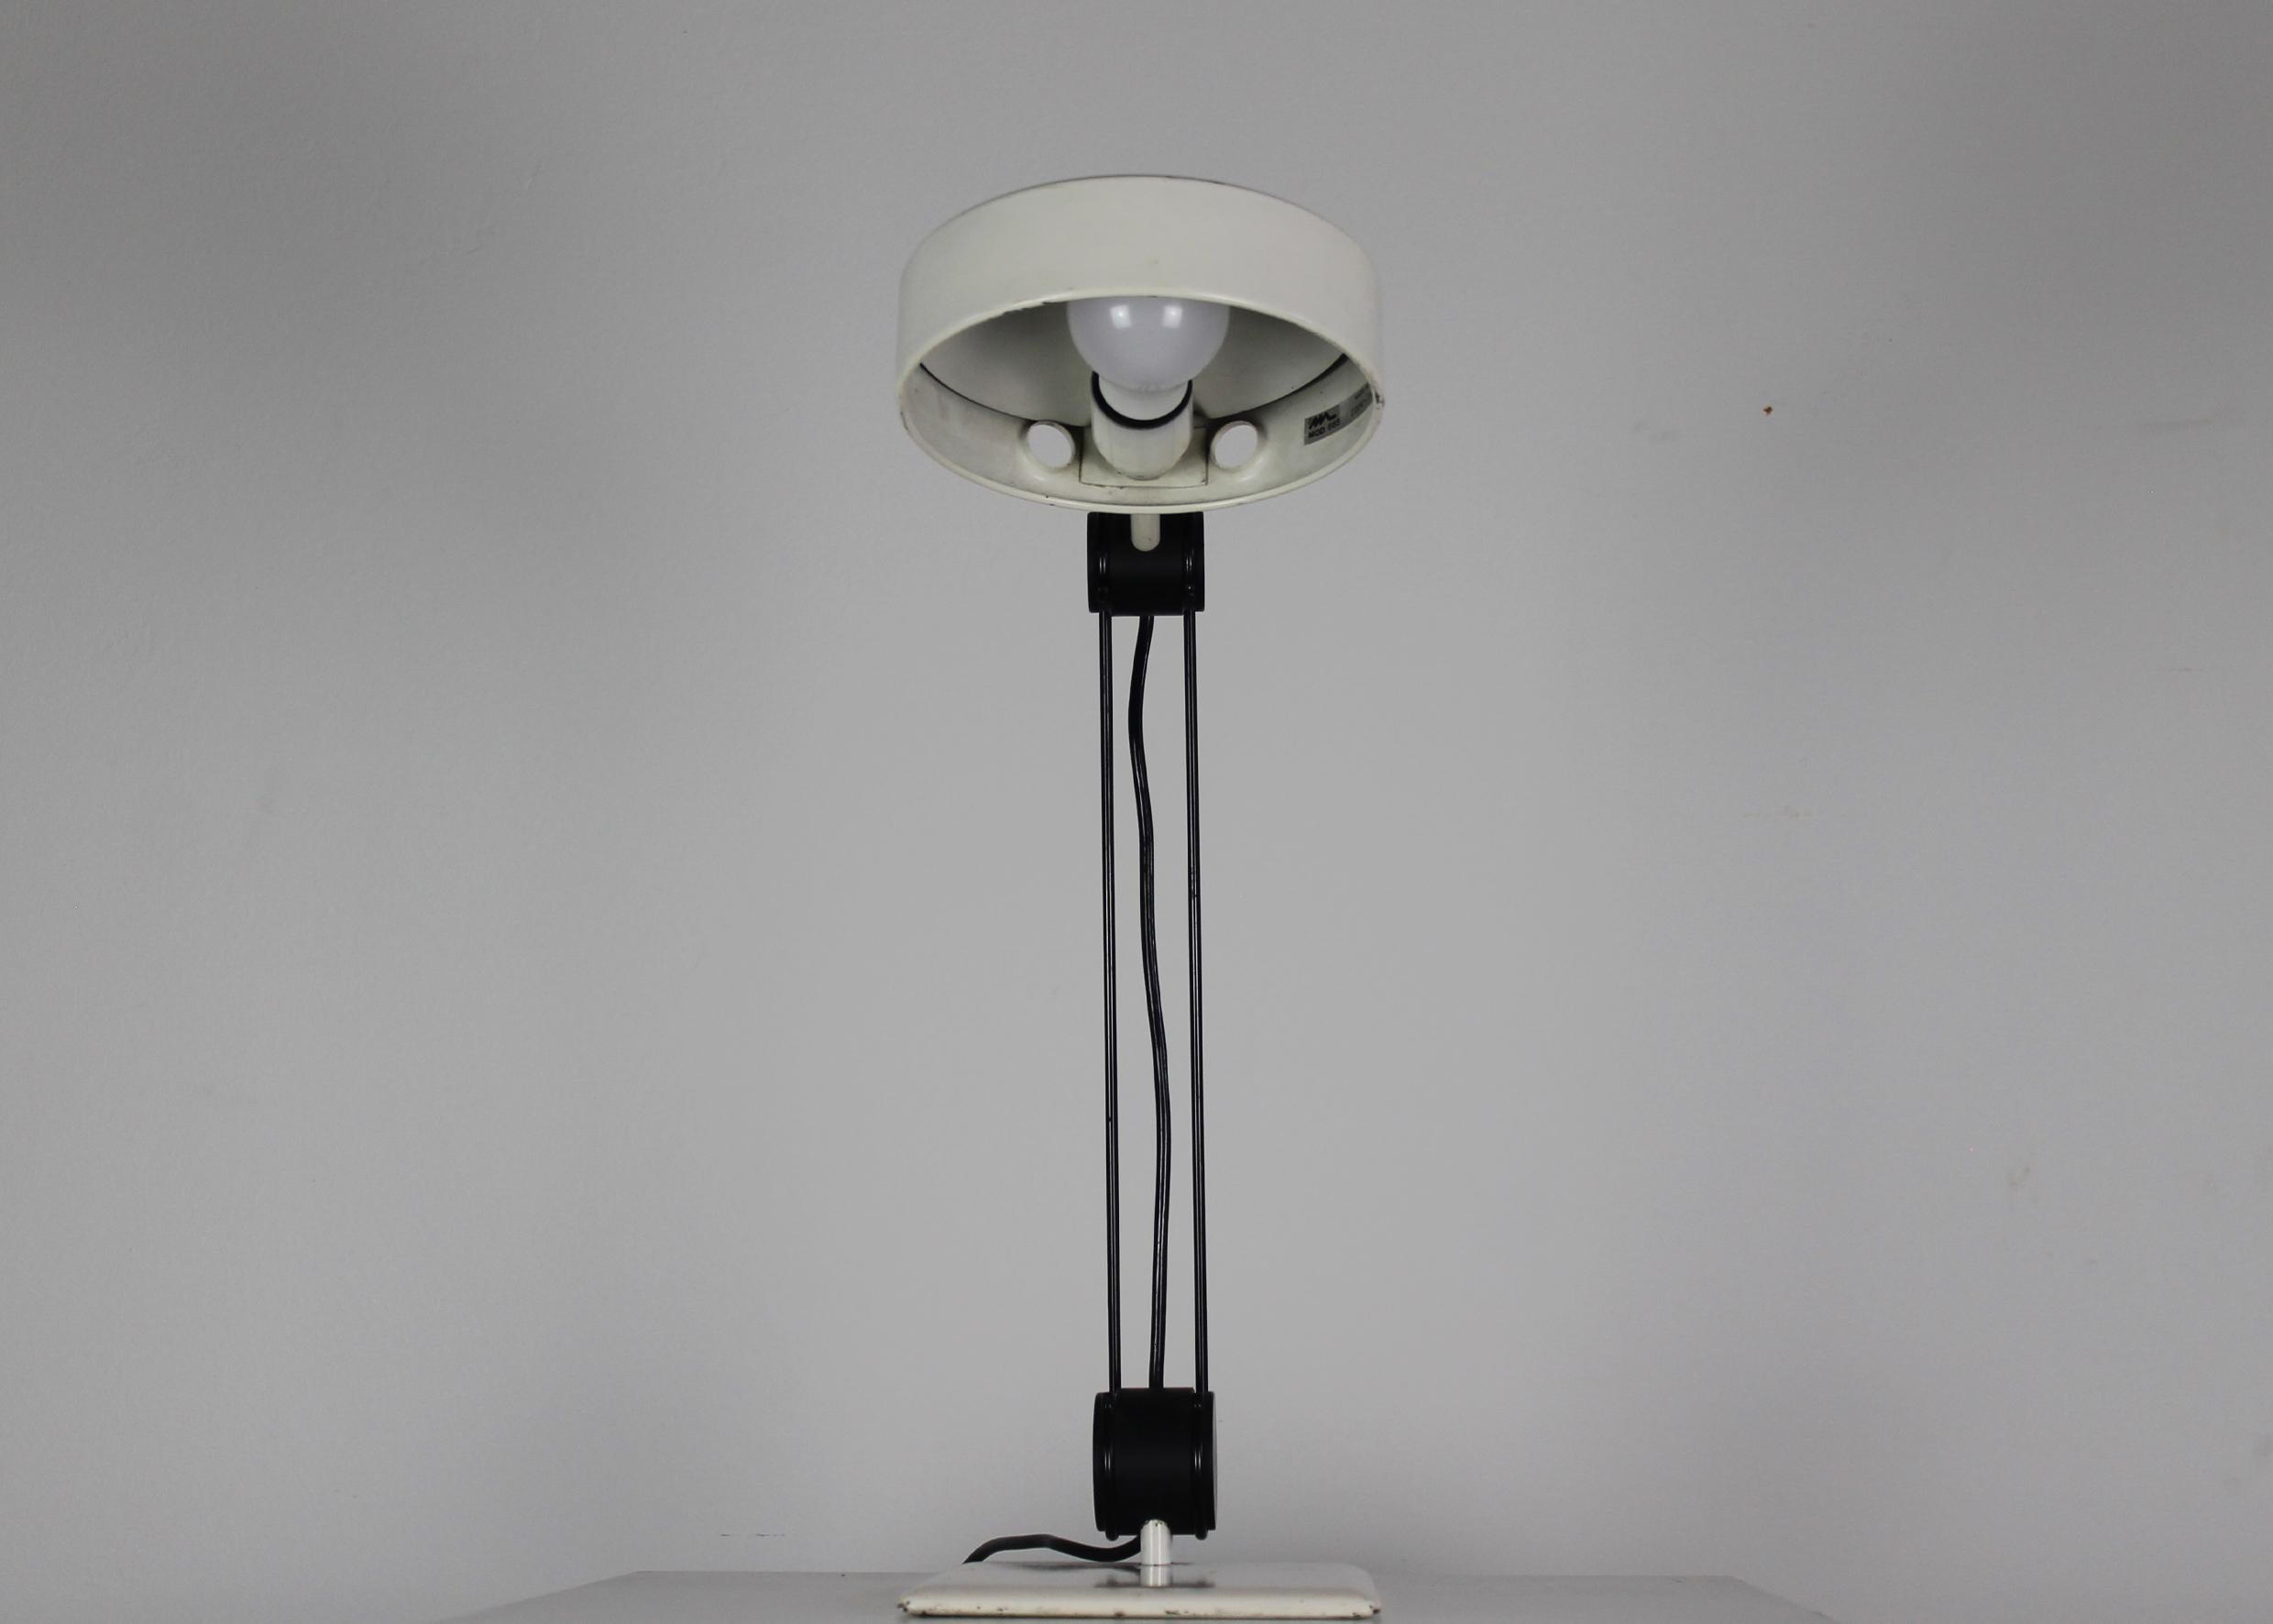 Mid-Century Modern 665 or Zeta Desk Lamp in White Lacquered Metal by Martinelli Luce 1970s Italy For Sale